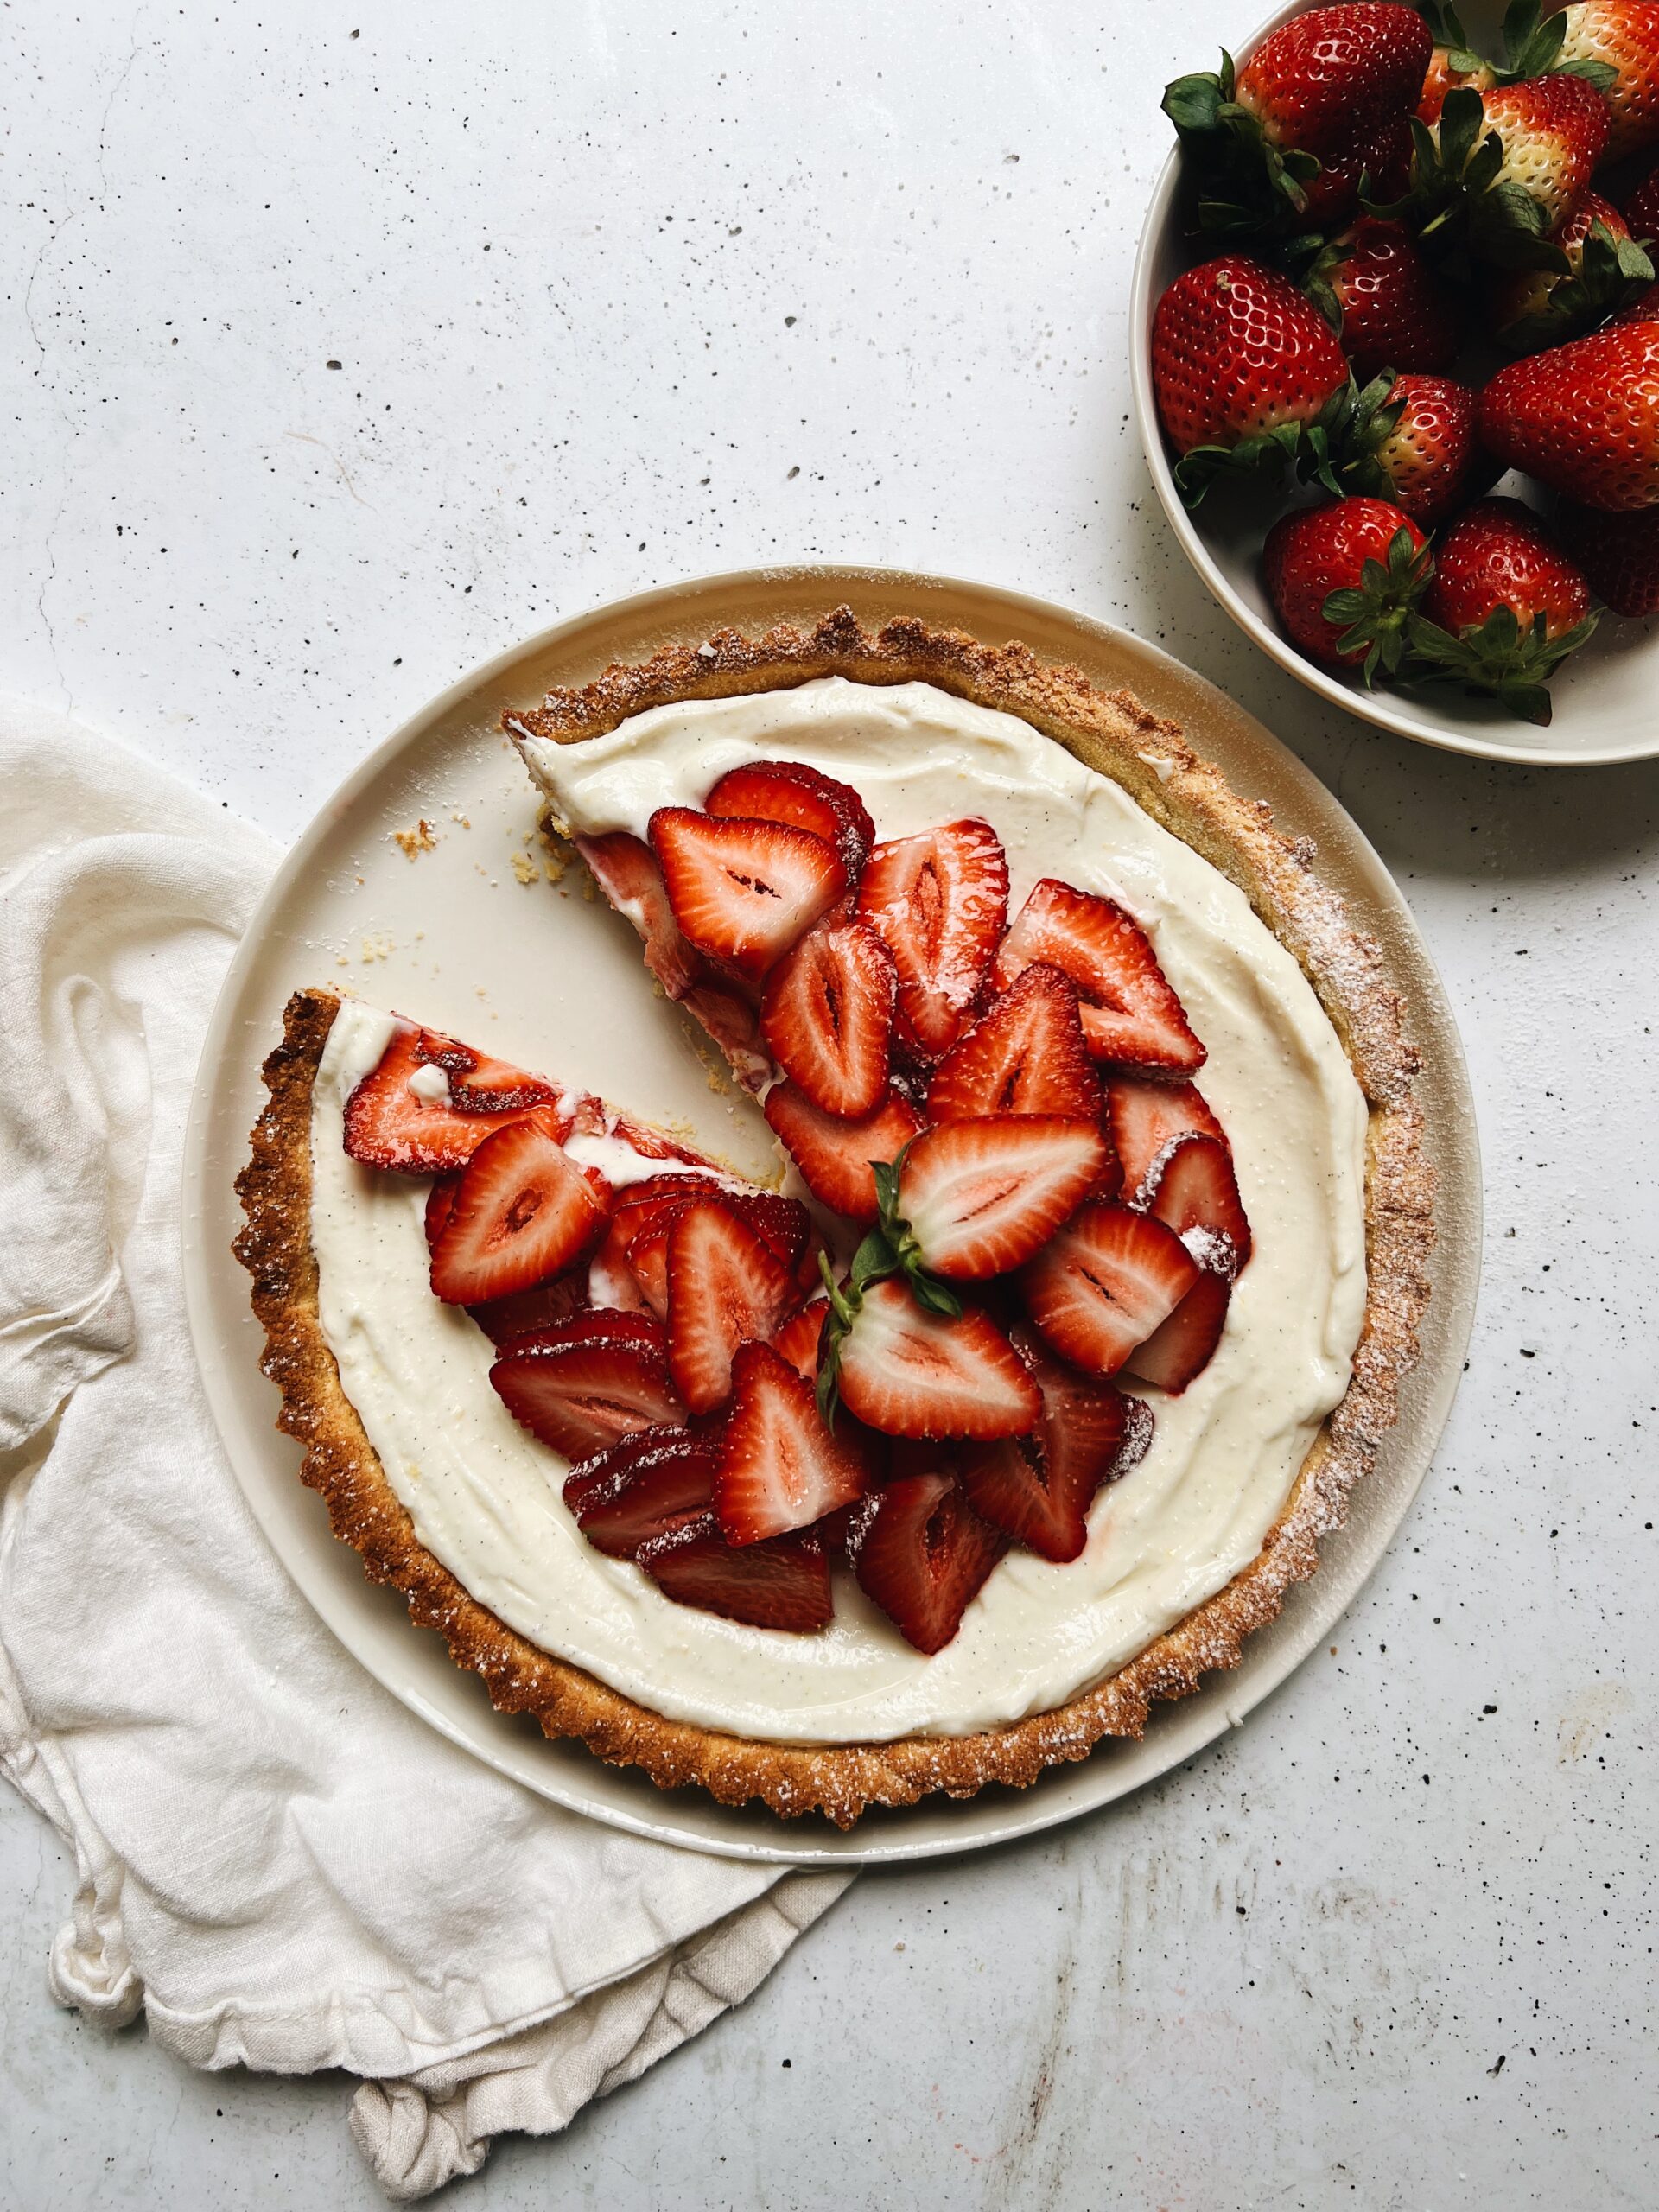 Strawberry tart sits on napkin on table. A bowl of strawberries sit alongside.